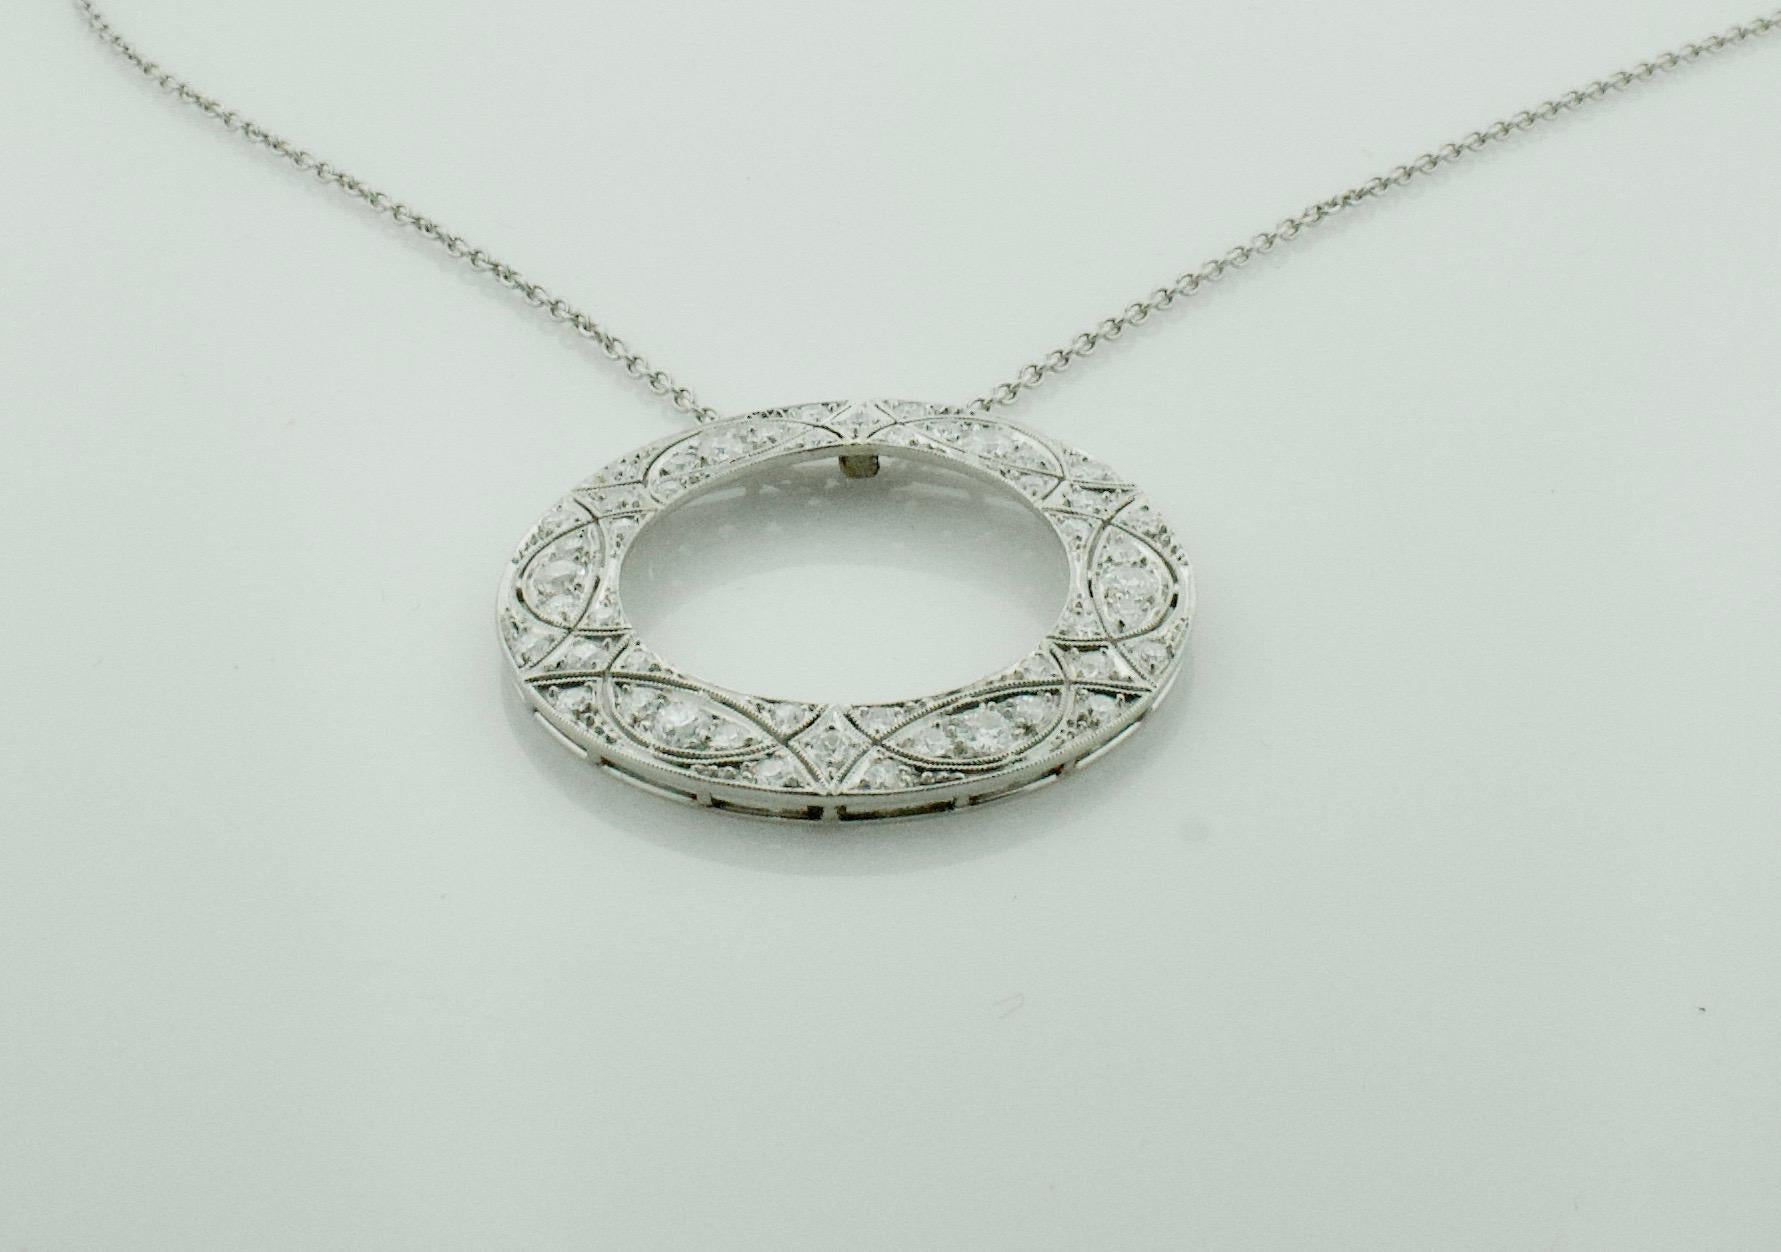 Introducing our stunning Art Deco Platinum Diamond Circle Necklace, a true masterpiece from the 1920s. With a total carat weight of 2.30 carats, this necklace is an exquisite example of fine craftsmanship from a master of the era.

The necklace